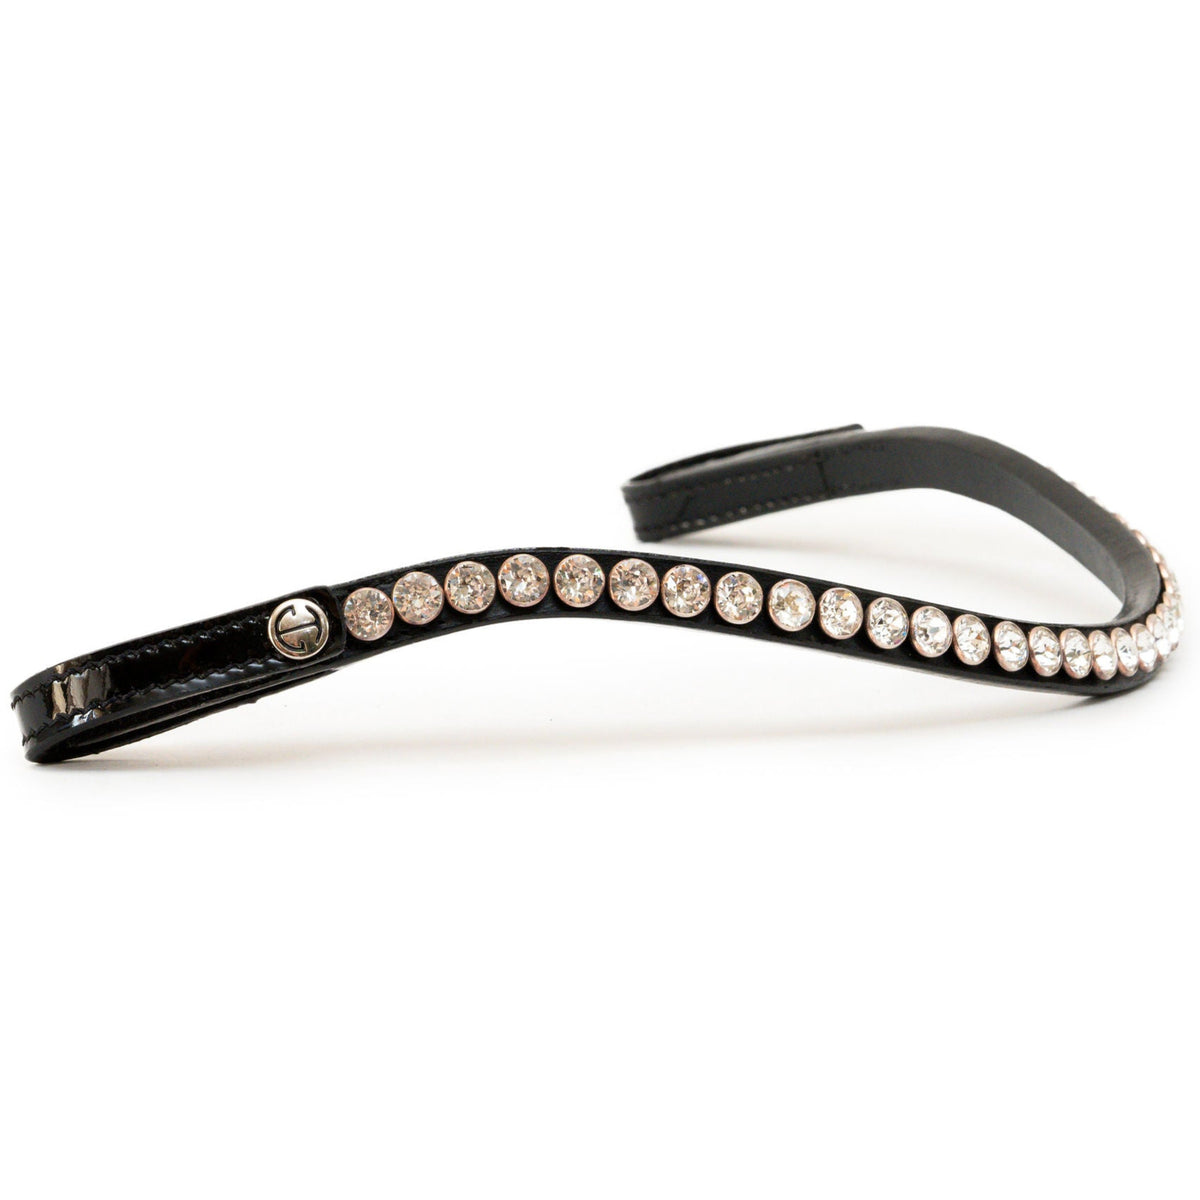 The Classic - Slimline Clear Crystal Rivet Browband